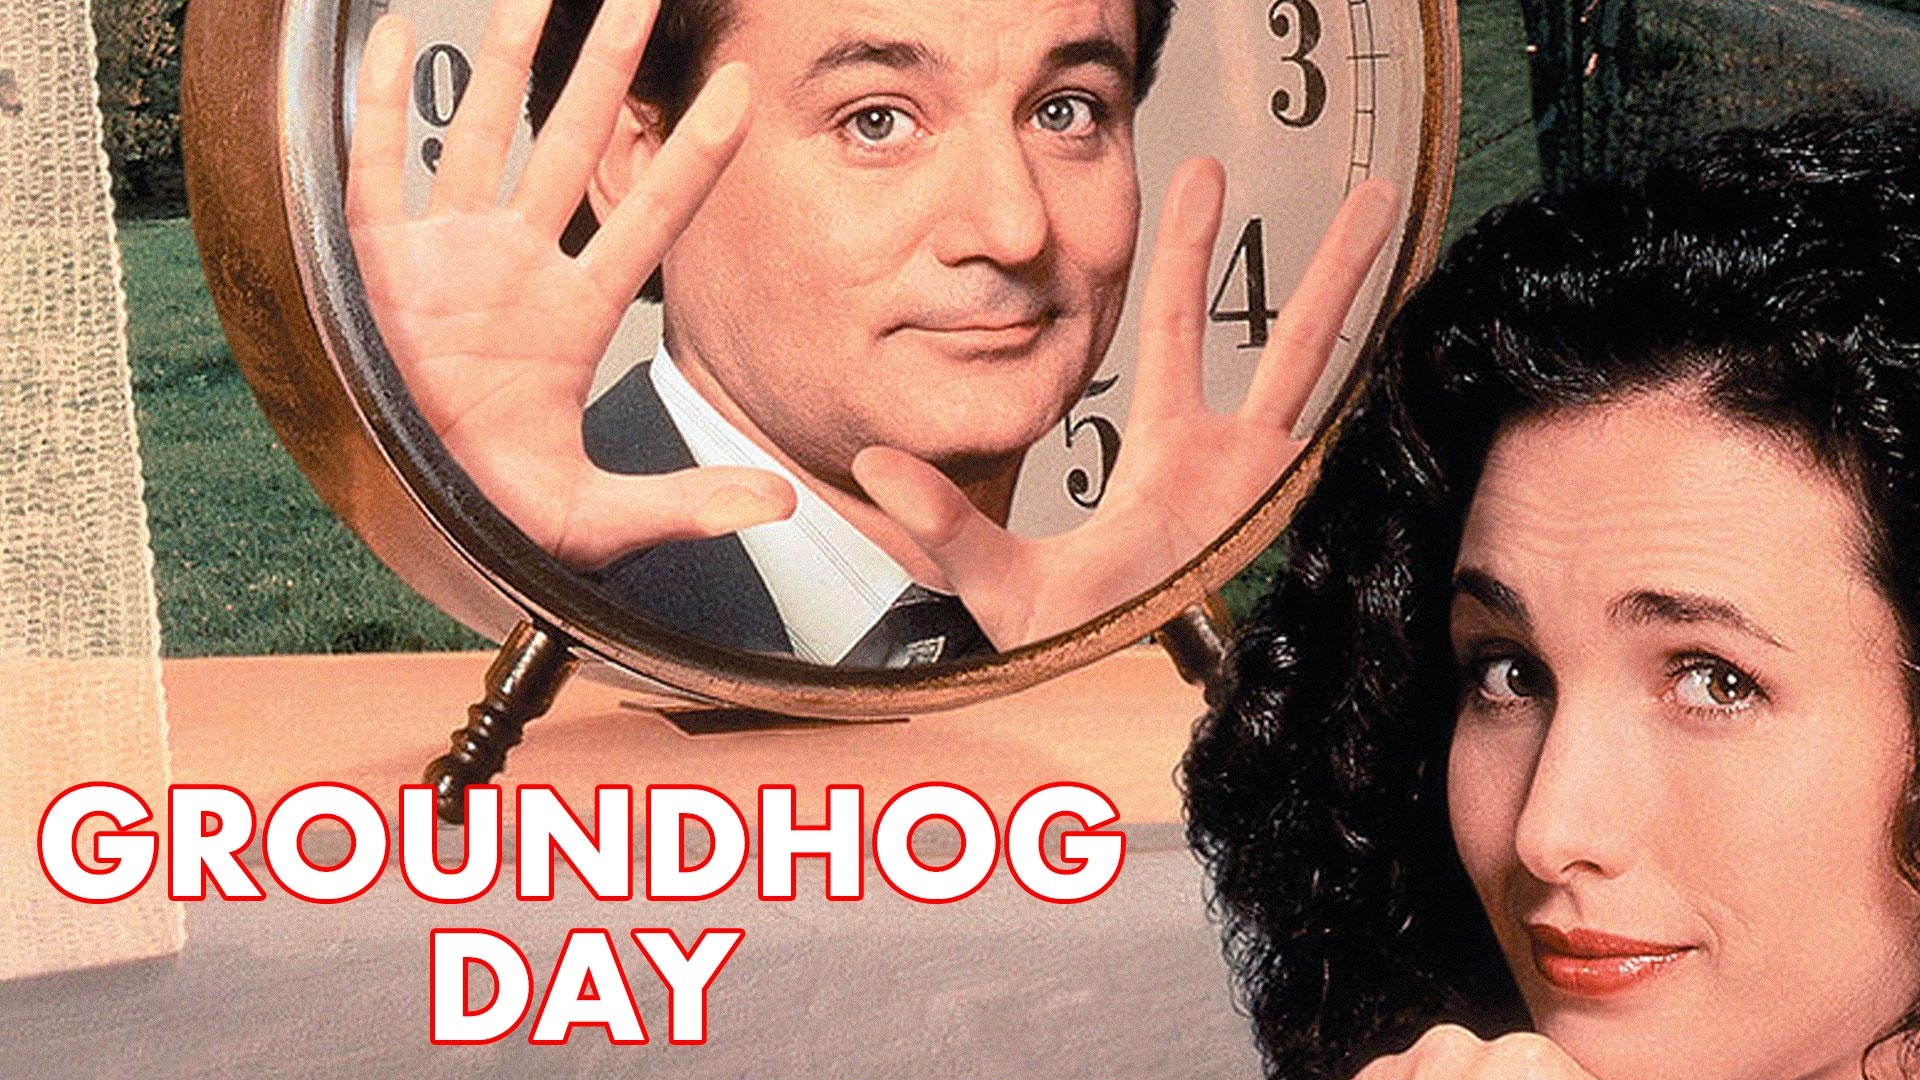 Groundhog Day (Movie): The song that greets Phil Connors every morning is "I've Got You Babe" by Sonny and Cher. 1920x1080 Full HD Background.